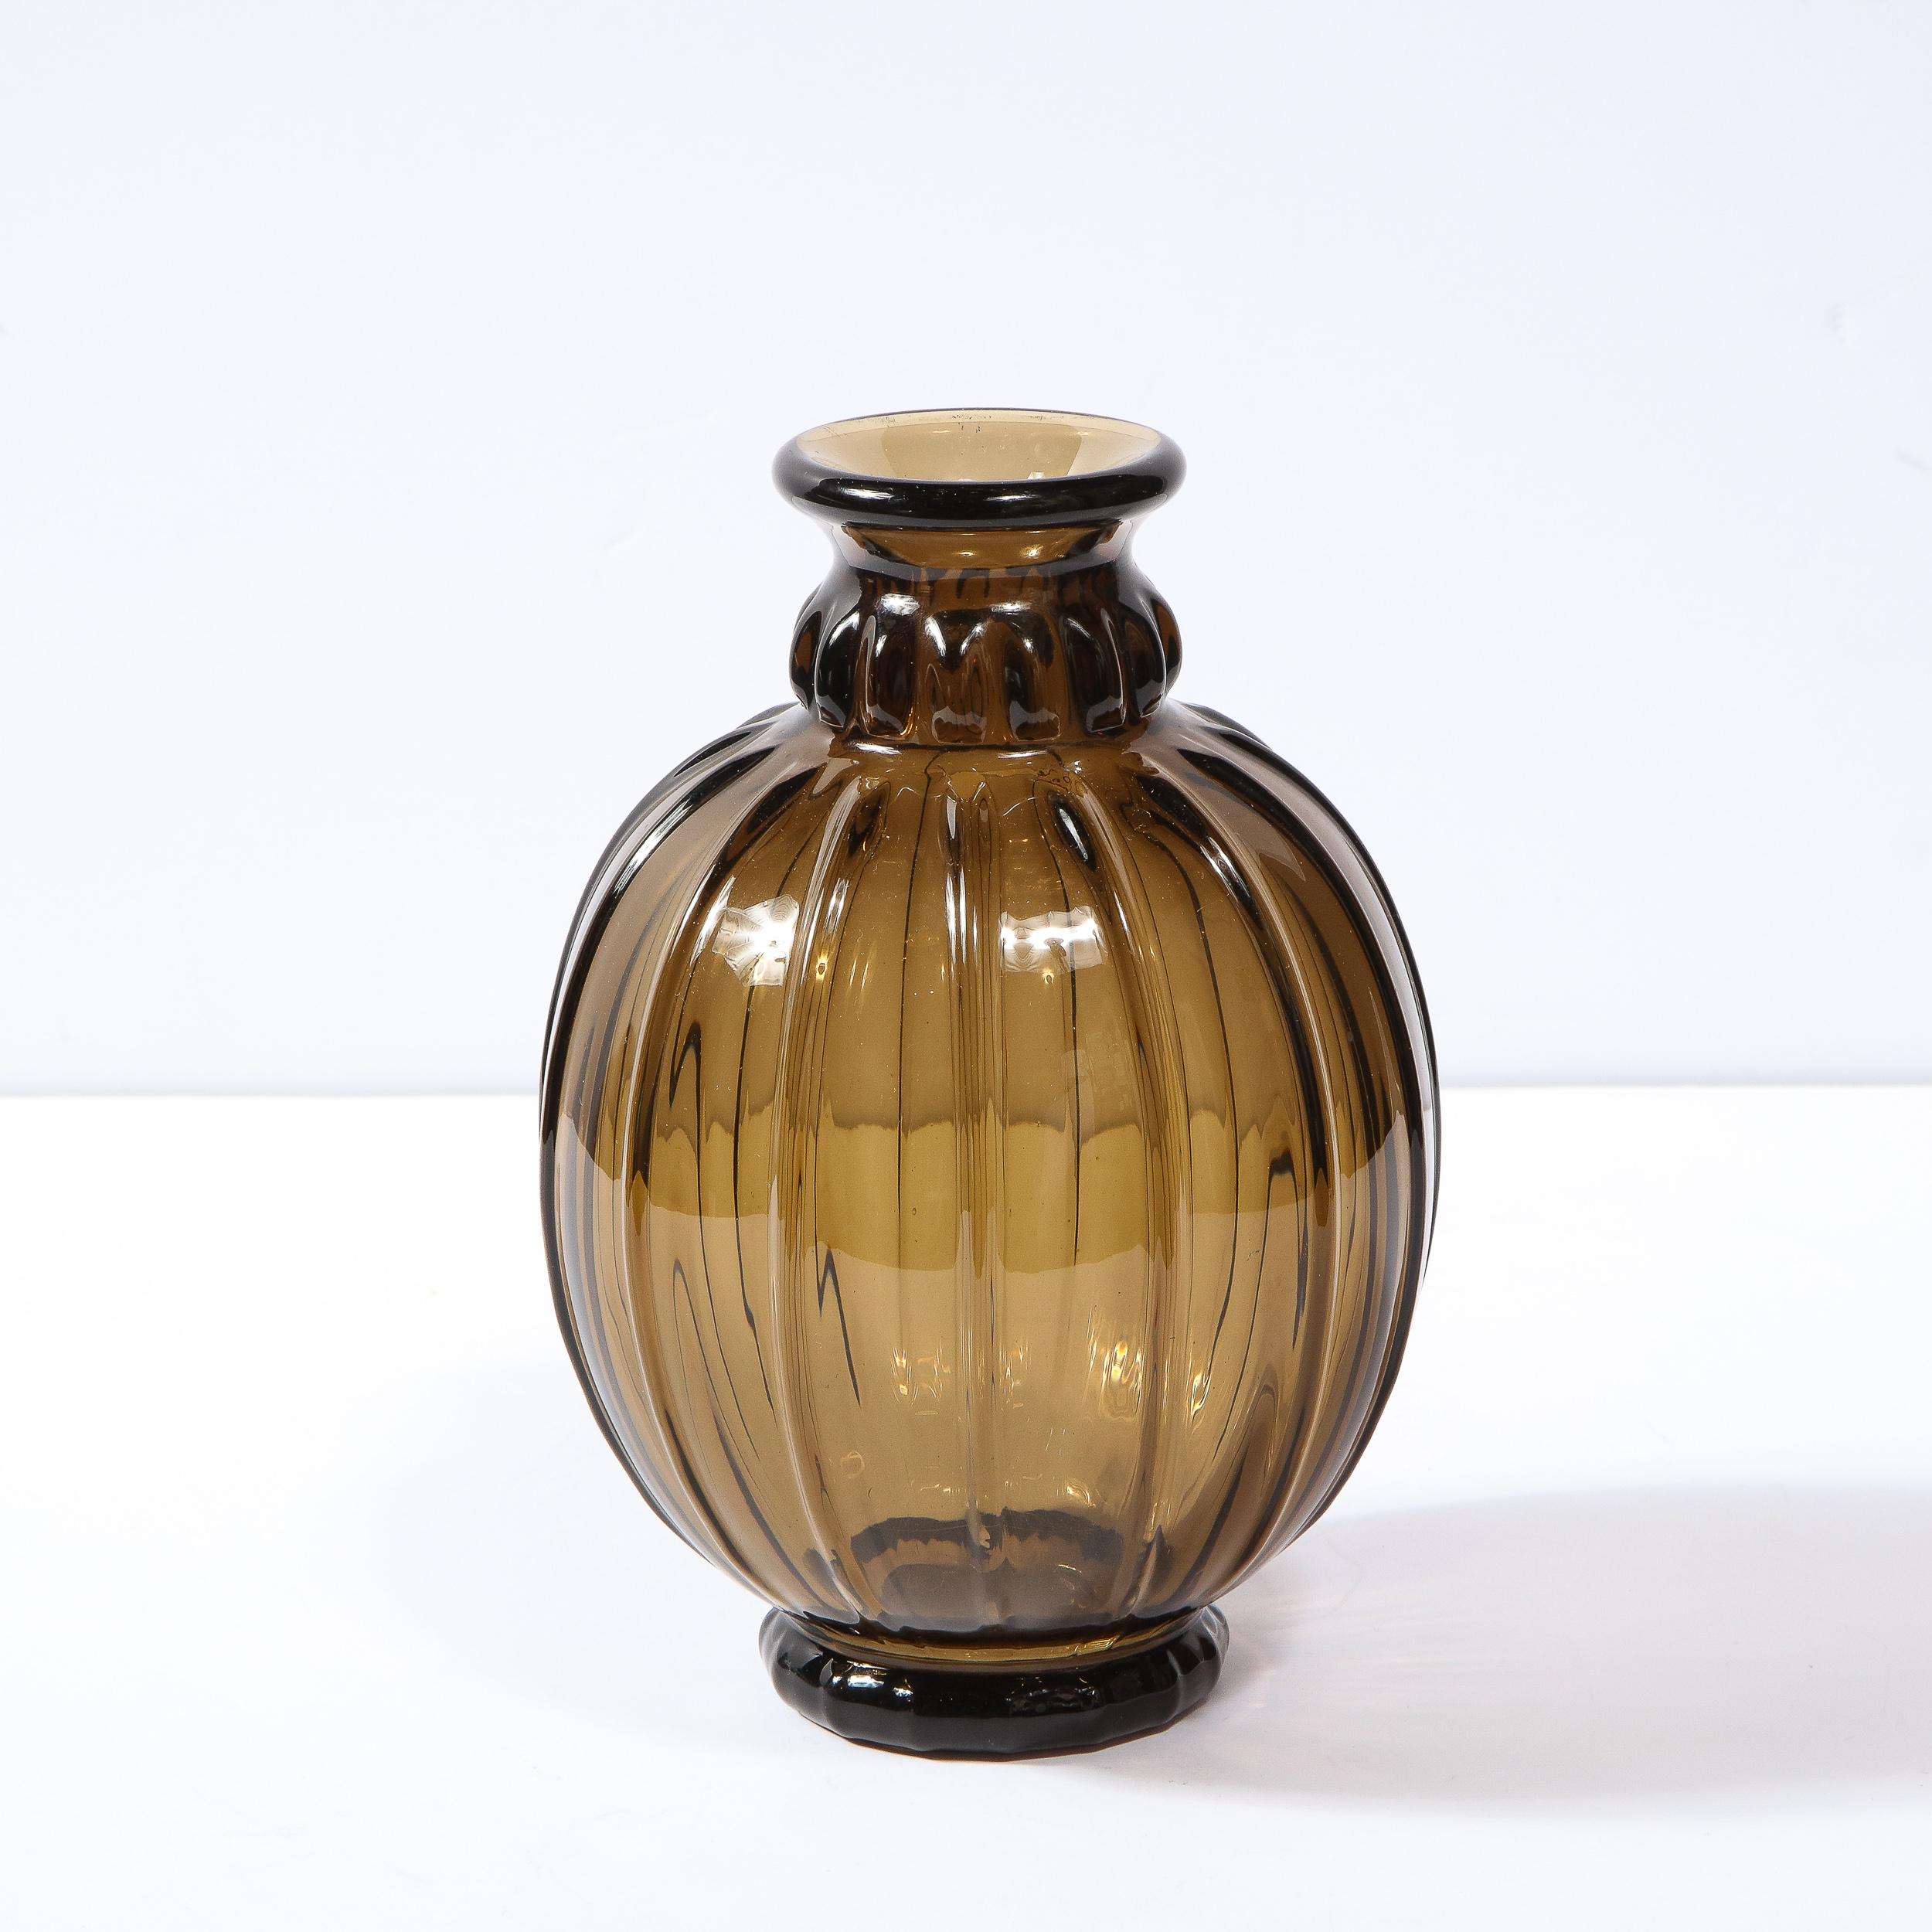 This elegant topaz and museum quality French Art Deco hand blown glass vase by the studio Daum is designed with vertically equidistant repeating bands tapered to a 2.5